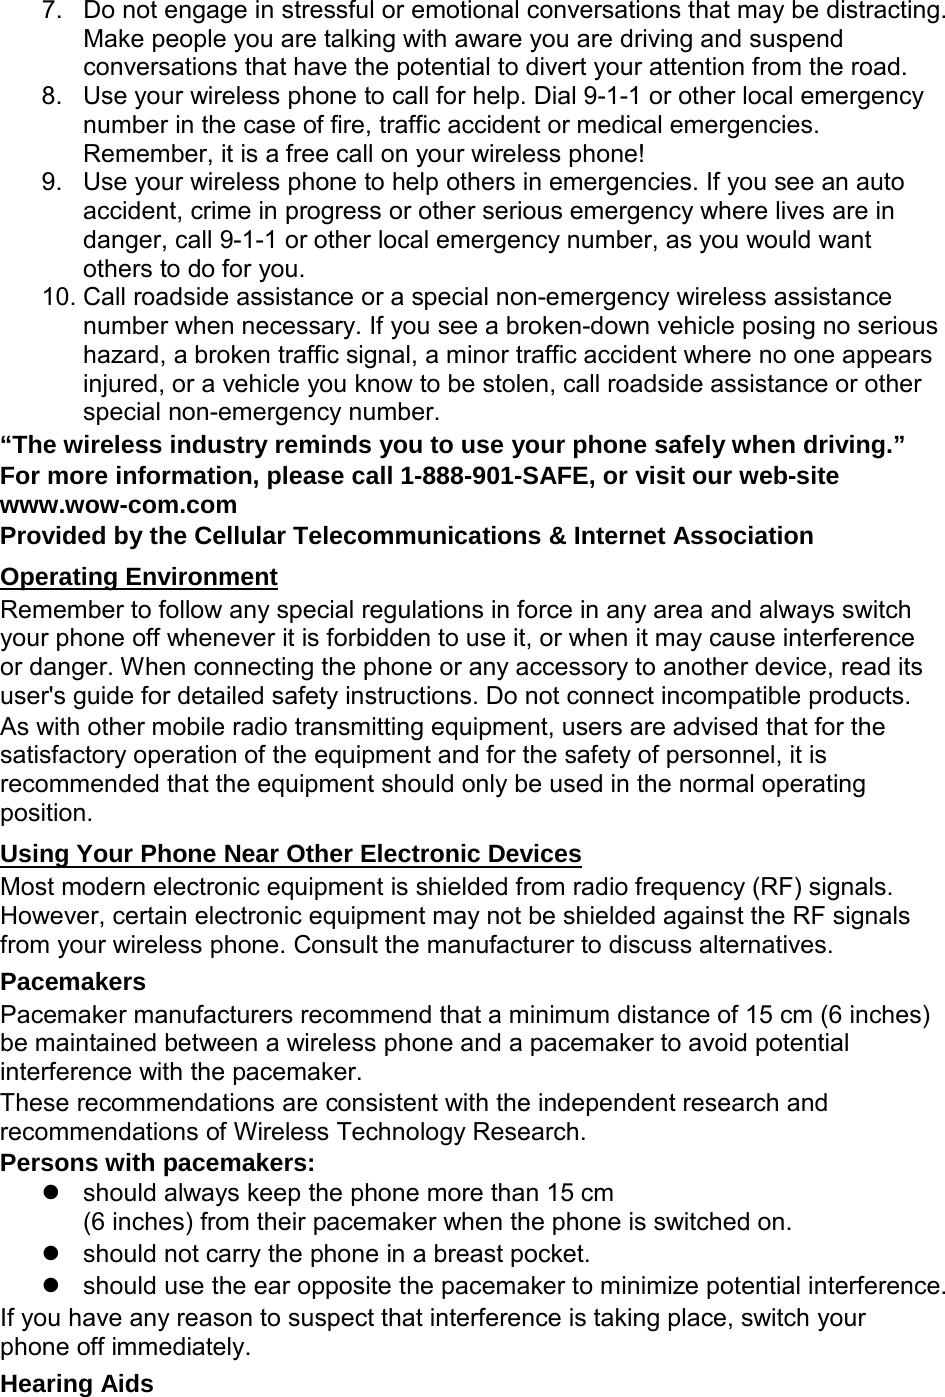 7. Do not engage in stressful or emotional conversations that may be distracting. Make people you are talking with aware you are driving and suspend conversations that have the potential to divert your attention from the road. 8. Use your wireless phone to call for help. Dial 9-1-1 or other local emergency number in the case of fire, traffic accident or medical emergencies. Remember, it is a free call on your wireless phone! 9. Use your wireless phone to help others in emergencies. If you see an auto accident, crime in progress or other serious emergency where lives are in danger, call 9-1-1 or other local emergency number, as you would want others to do for you. 10. Call roadside assistance or a special non-emergency wireless assistance number when necessary. If you see a broken-down vehicle posing no serious hazard, a broken traffic signal, a minor traffic accident where no one appears injured, or a vehicle you know to be stolen, call roadside assistance or other special non-emergency number. “The wireless industry reminds you to use your phone safely when driving.” For more information, please call 1-888-901-SAFE, or visit our web-site www.wow-com.com Provided by the Cellular Telecommunications &amp; Internet Association Operating Environment Remember to follow any special regulations in force in any area and always switch your phone off whenever it is forbidden to use it, or when it may cause interference or danger. When connecting the phone or any accessory to another device, read its user&apos;s guide for detailed safety instructions. Do not connect incompatible products. As with other mobile radio transmitting equipment, users are advised that for the satisfactory operation of the equipment and for the safety of personnel, it is recommended that the equipment should only be used in the normal operating position. Using Your Phone Near Other Electronic Devices Most modern electronic equipment is shielded from radio frequency (RF) signals. However, certain electronic equipment may not be shielded against the RF signals from your wireless phone. Consult the manufacturer to discuss alternatives. Pacemakers Pacemaker manufacturers recommend that a minimum distance of 15 cm (6 inches) be maintained between a wireless phone and a pacemaker to avoid potential interference with the pacemaker. These recommendations are consistent with the independent research and recommendations of Wireless Technology Research. Persons with pacemakers:  should always keep the phone more than 15 cm   (6 inches) from their pacemaker when the phone is switched on.  should not carry the phone in a breast pocket.  should use the ear opposite the pacemaker to minimize potential interference. If you have any reason to suspect that interference is taking place, switch your phone off immediately. Hearing Aids 